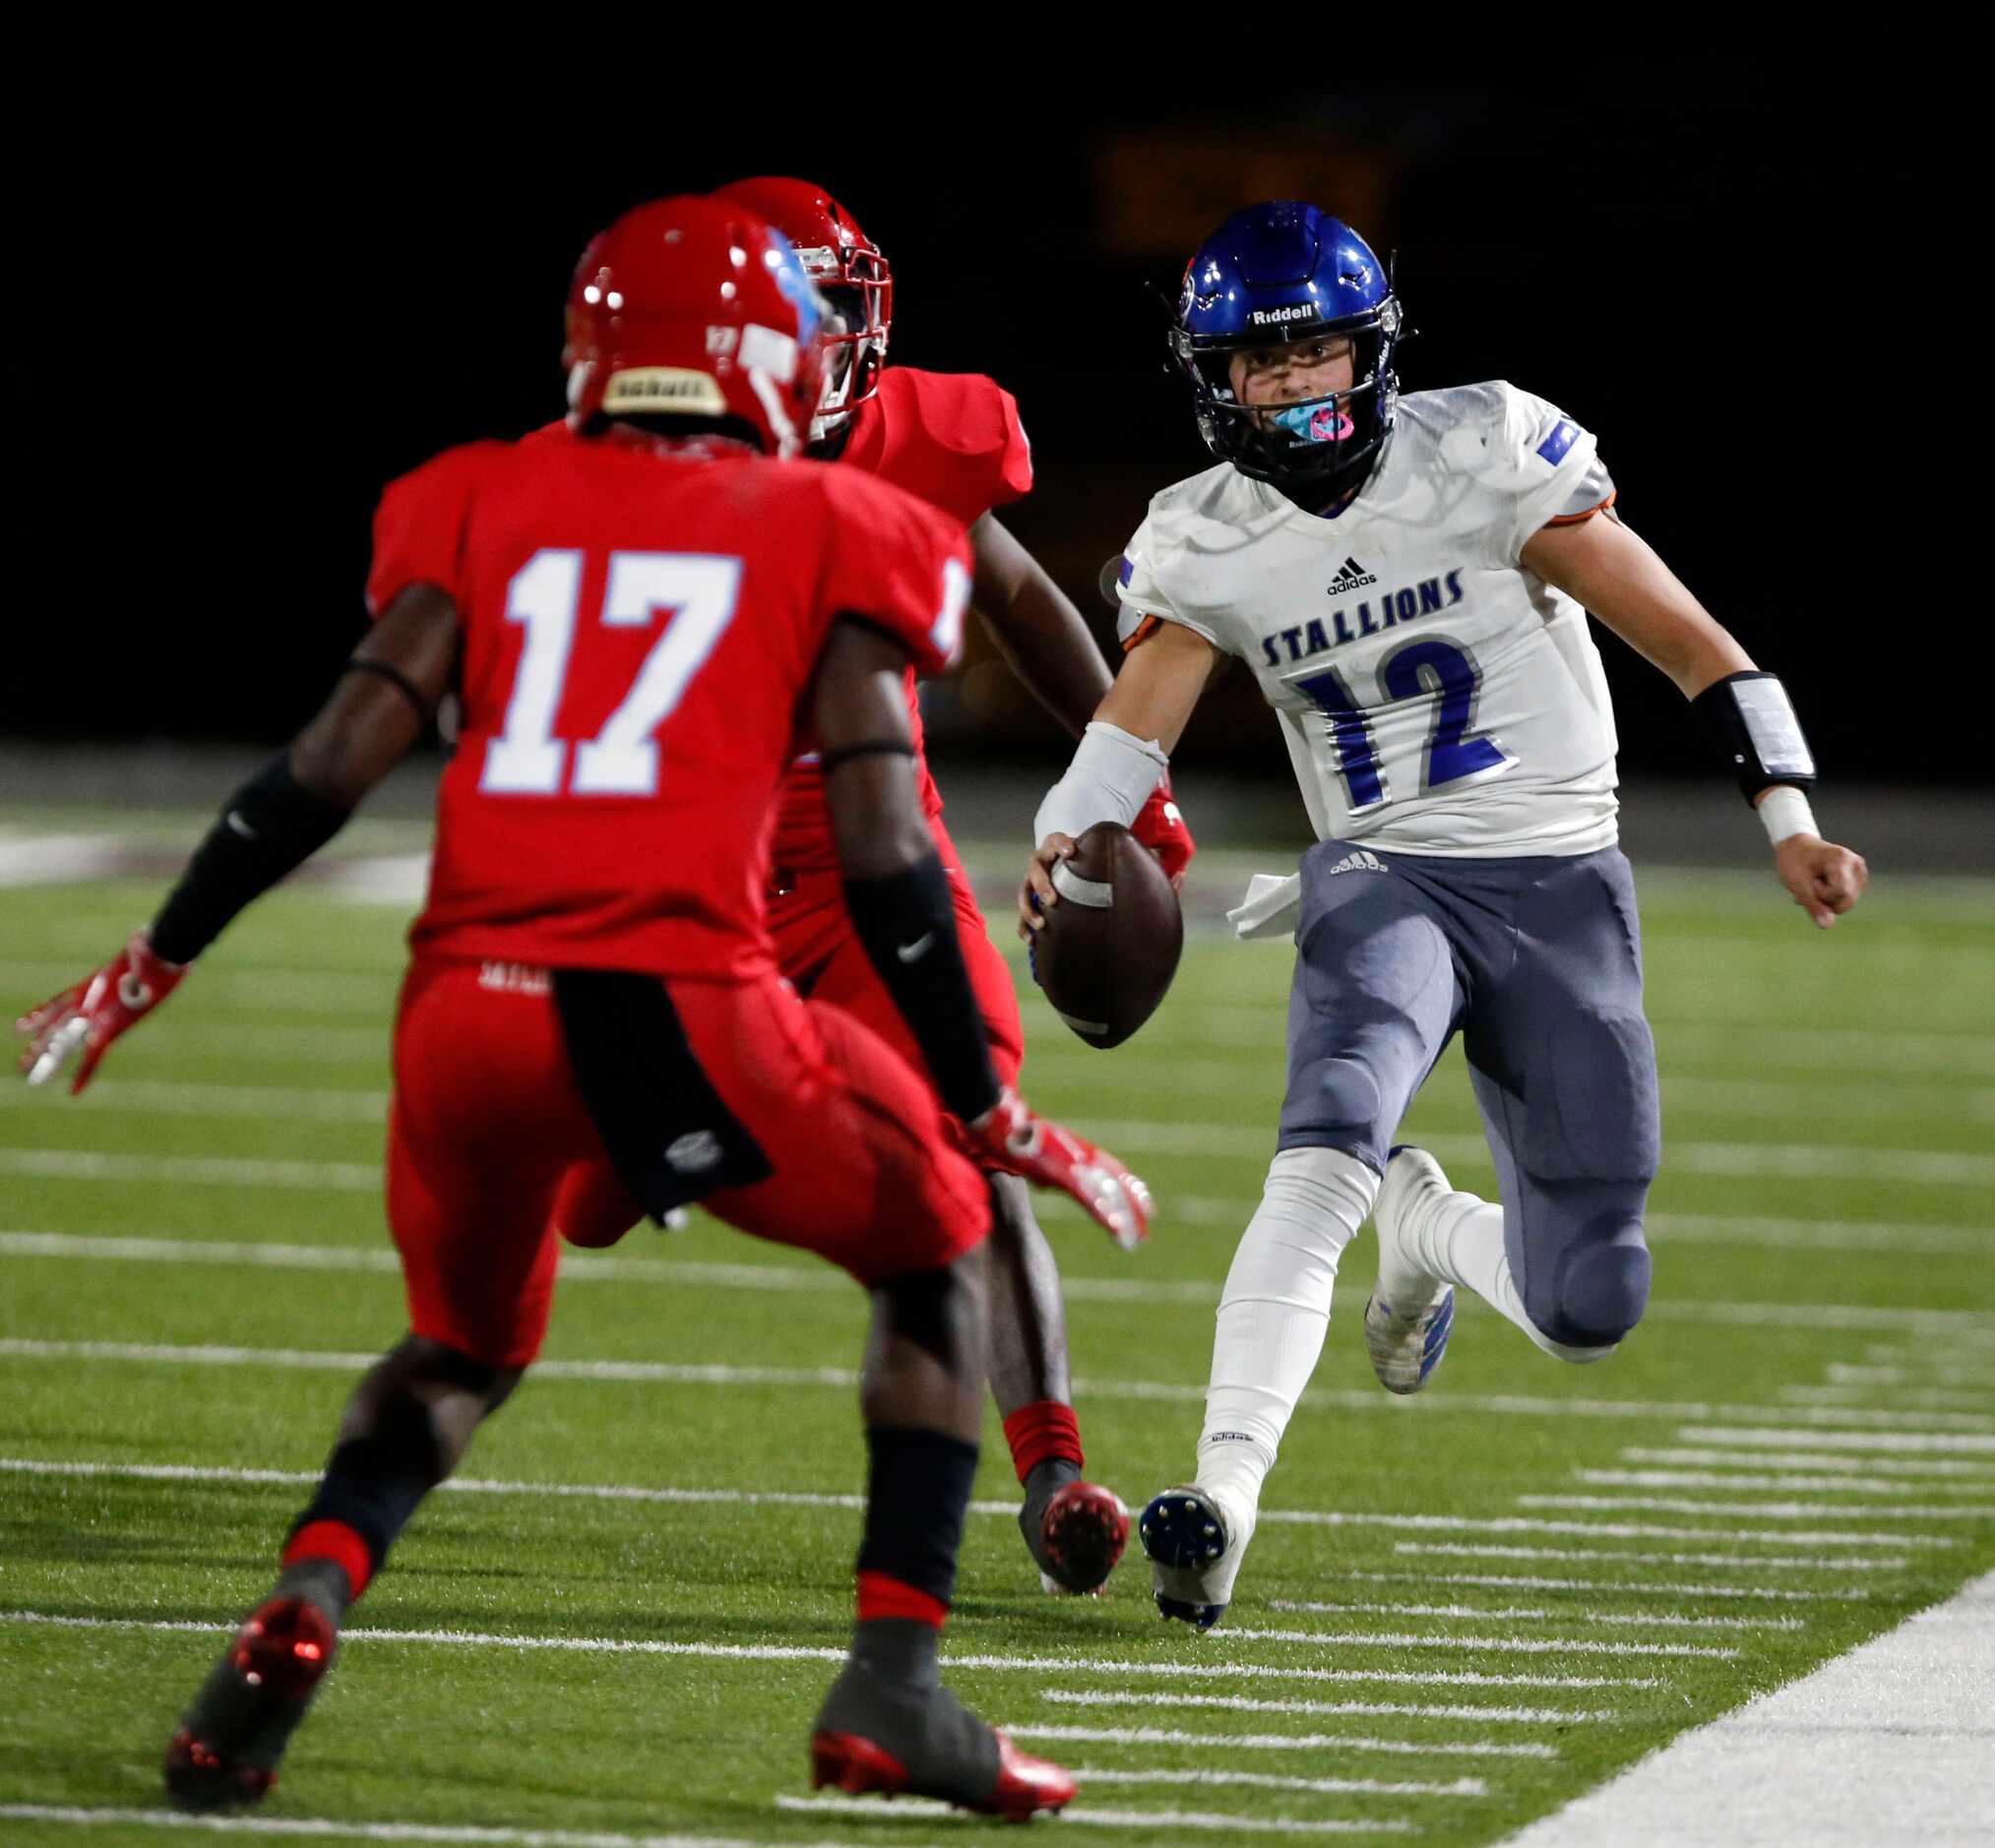 North Mesquite QB Liam Thornton (12) scrambles out of bounds during the first half of a high...